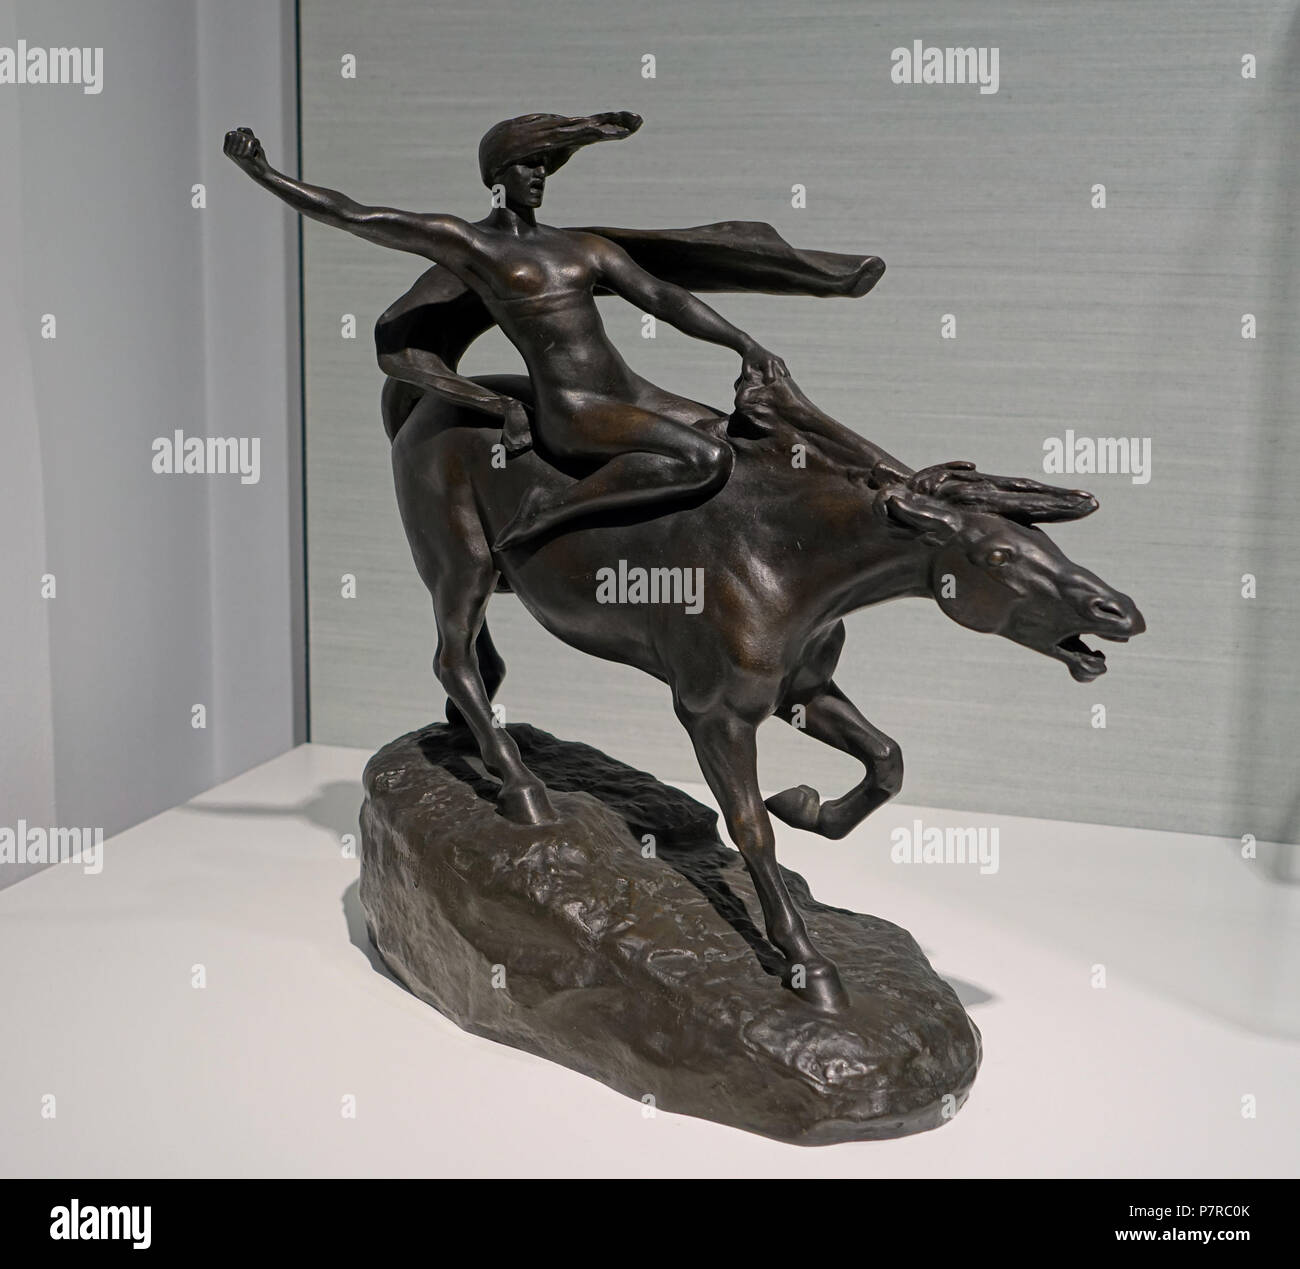 N/A. N/A 383 Valkyrie riding, by Stephan Abel Sinding, 1908, bronze - Hessisches Landesmuseum Darmstadt - Darmstadt, Germany - DSC00737 Stock Photo